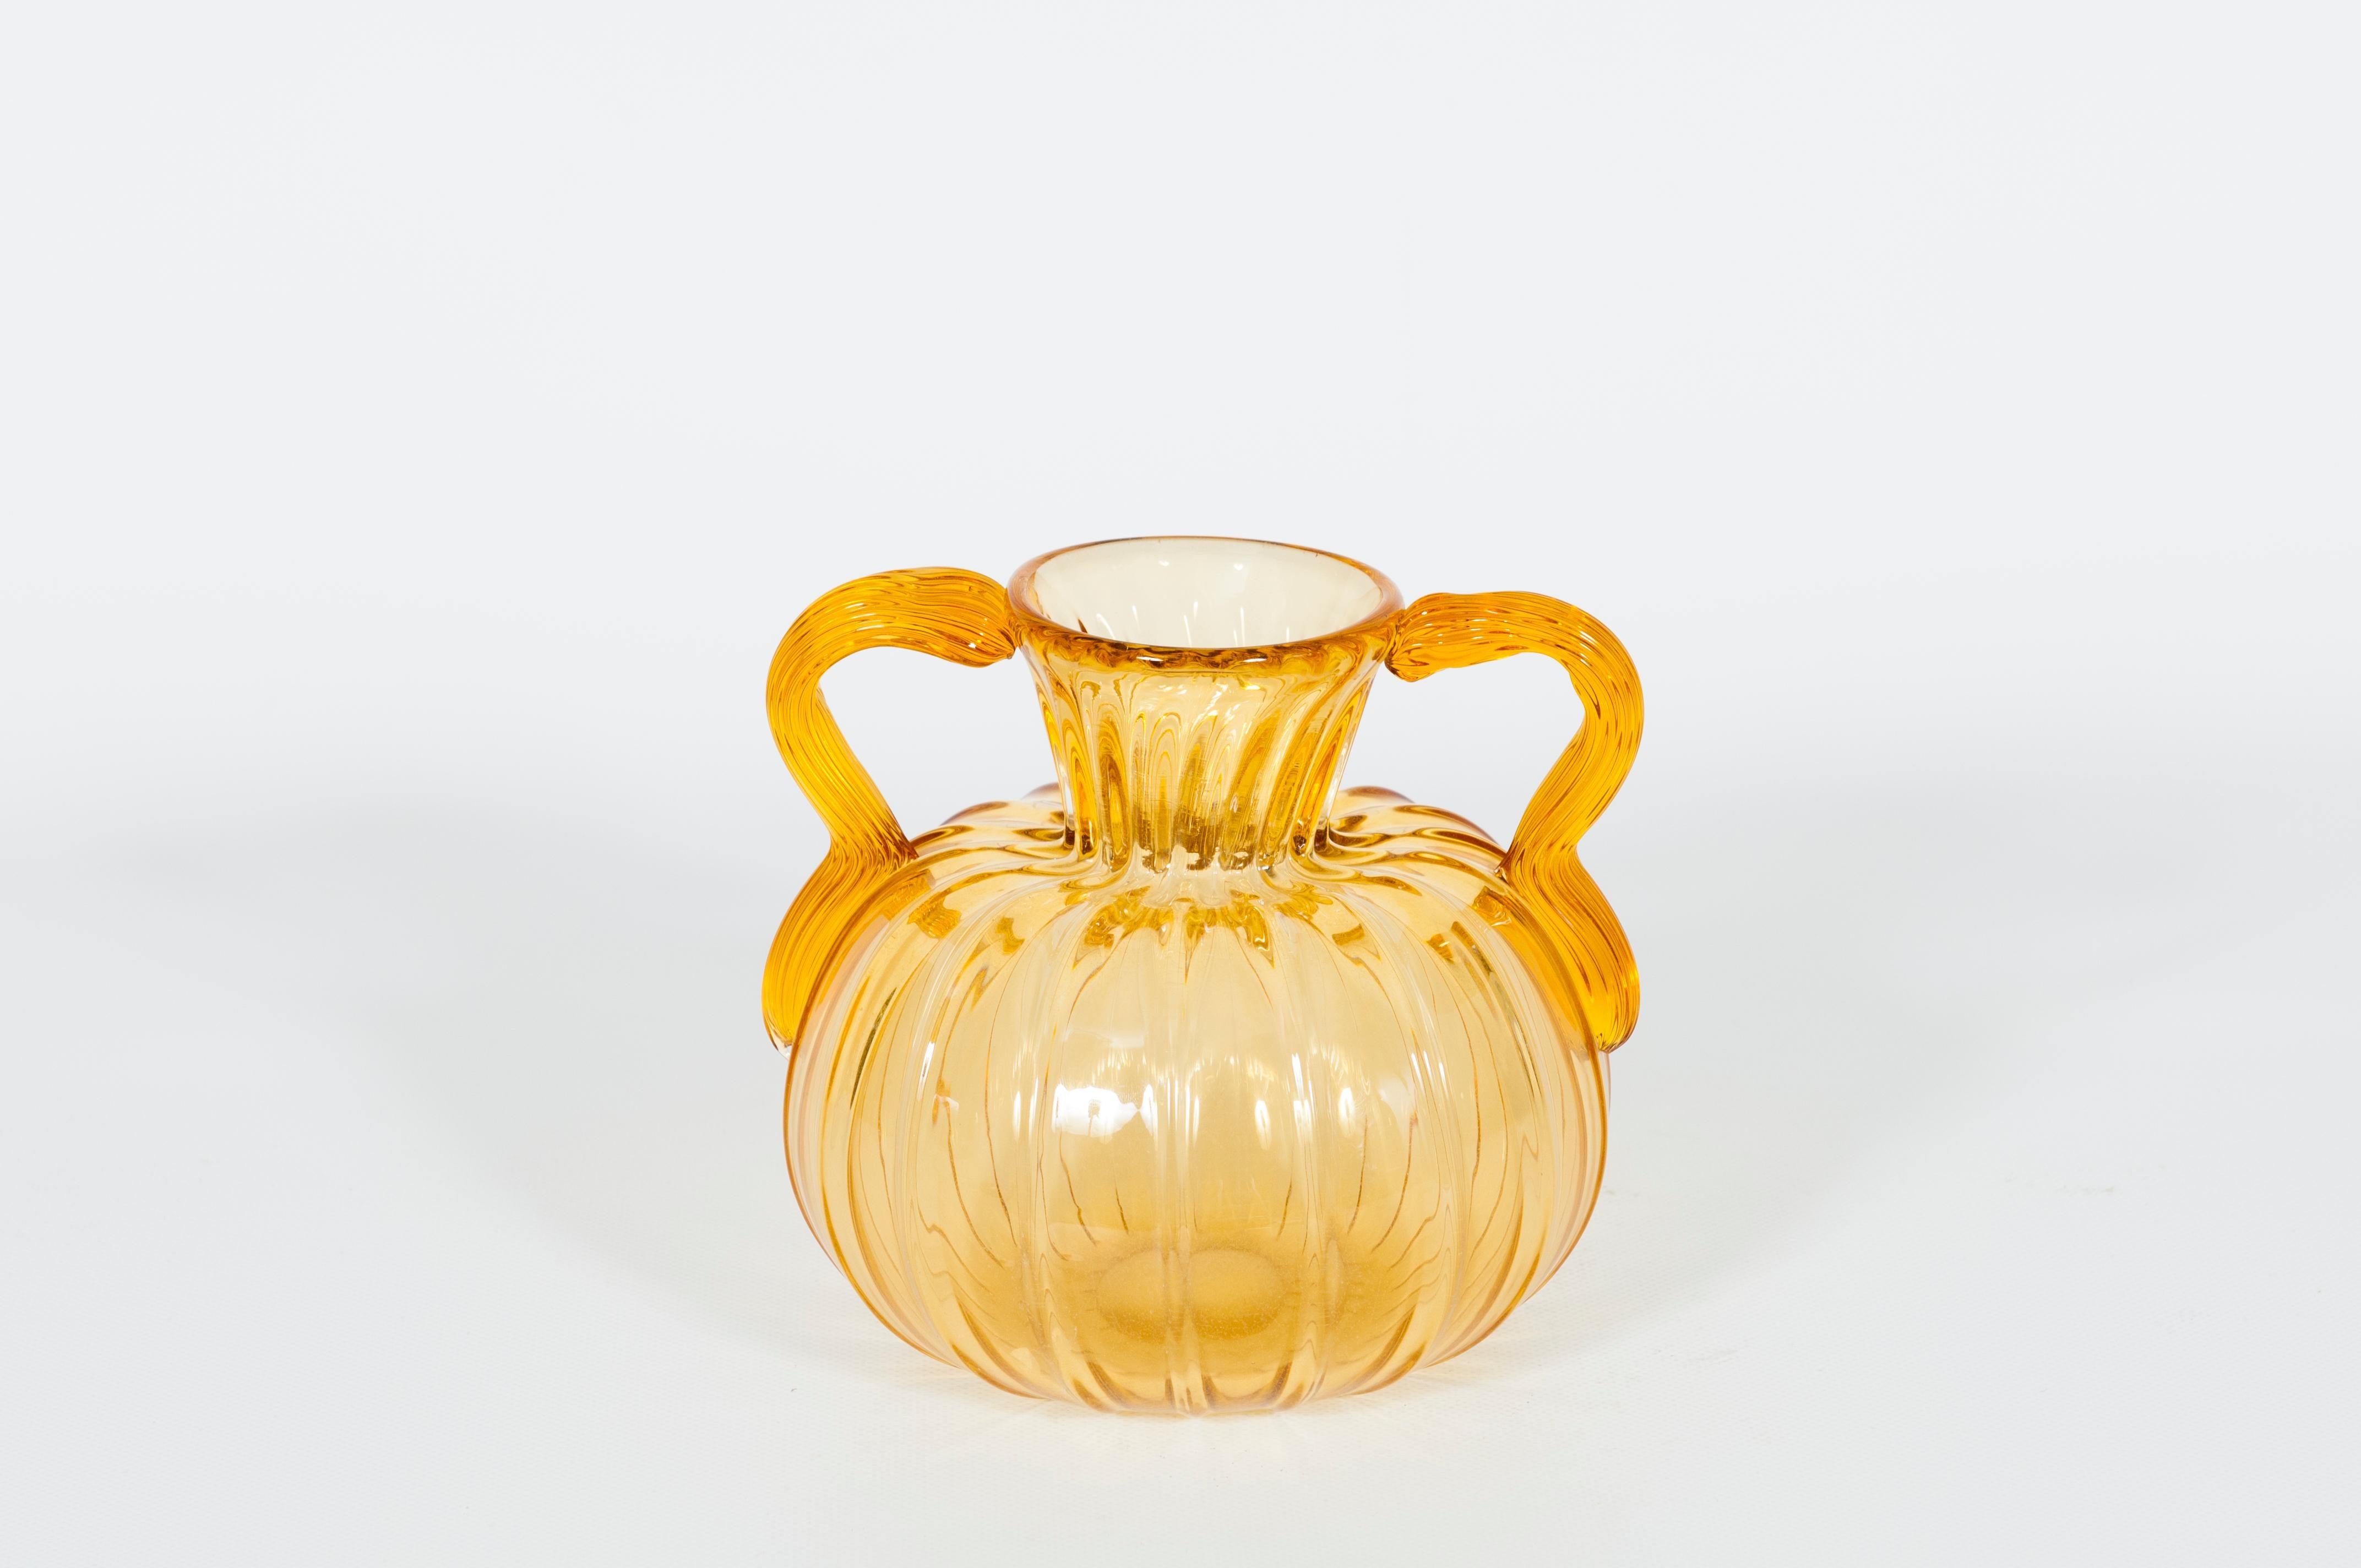 Italian amber-color Murano glass amphora, 1980s, Venice.
This amazing creation clearly owes to the Venetian love of beauty and art. Entirely made with blown amber-color glass in the island of Murano in the 1980s, this artistic amphor stands out for